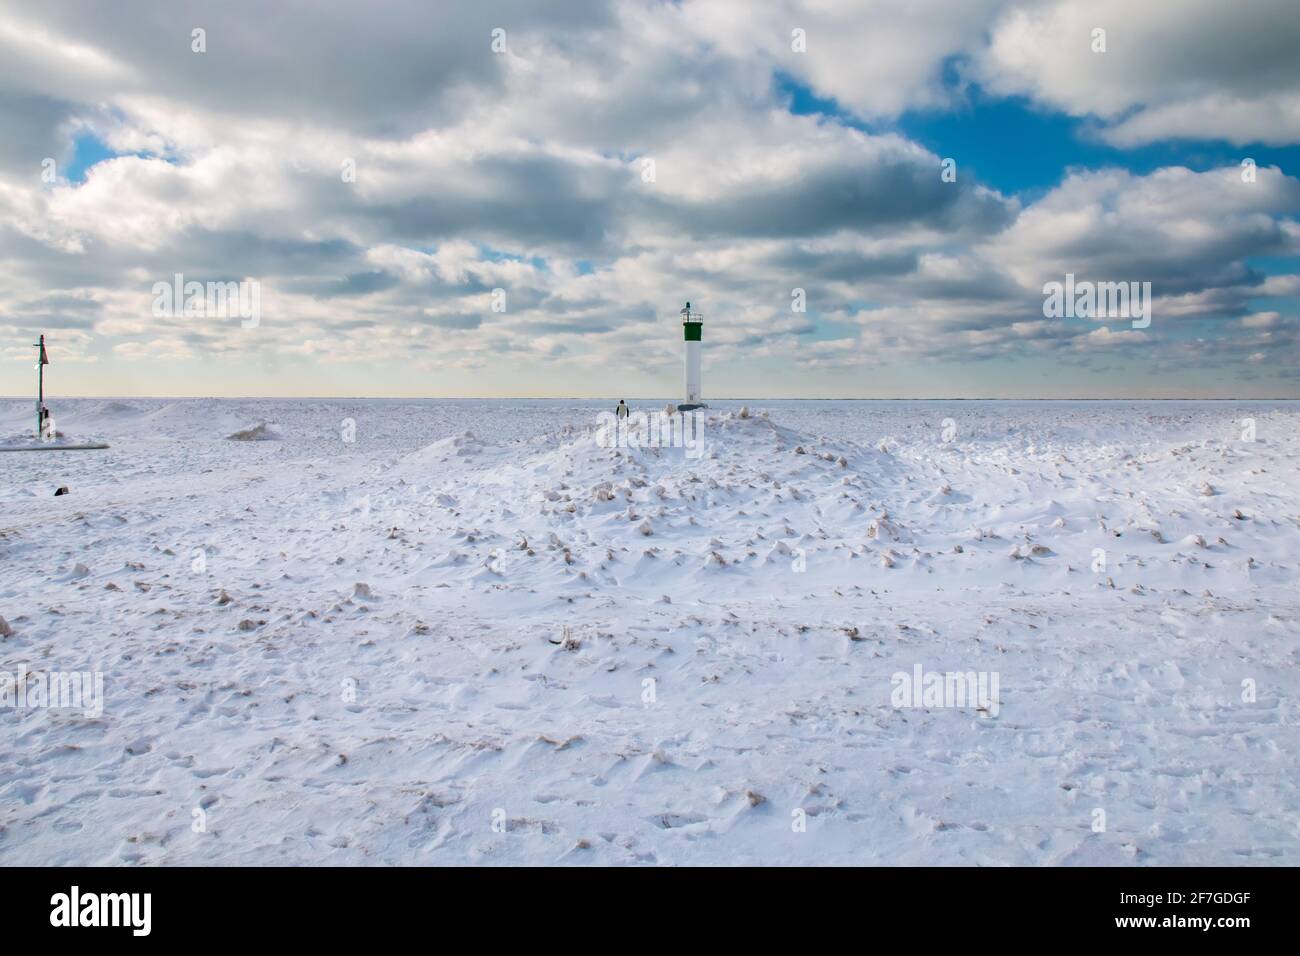 Grand Bend, Ontario, Canada - A man walks back from the edge of the Grand Bend Pier, where the lighthouse looks out onto a thick carpet of ice. Stock Photo